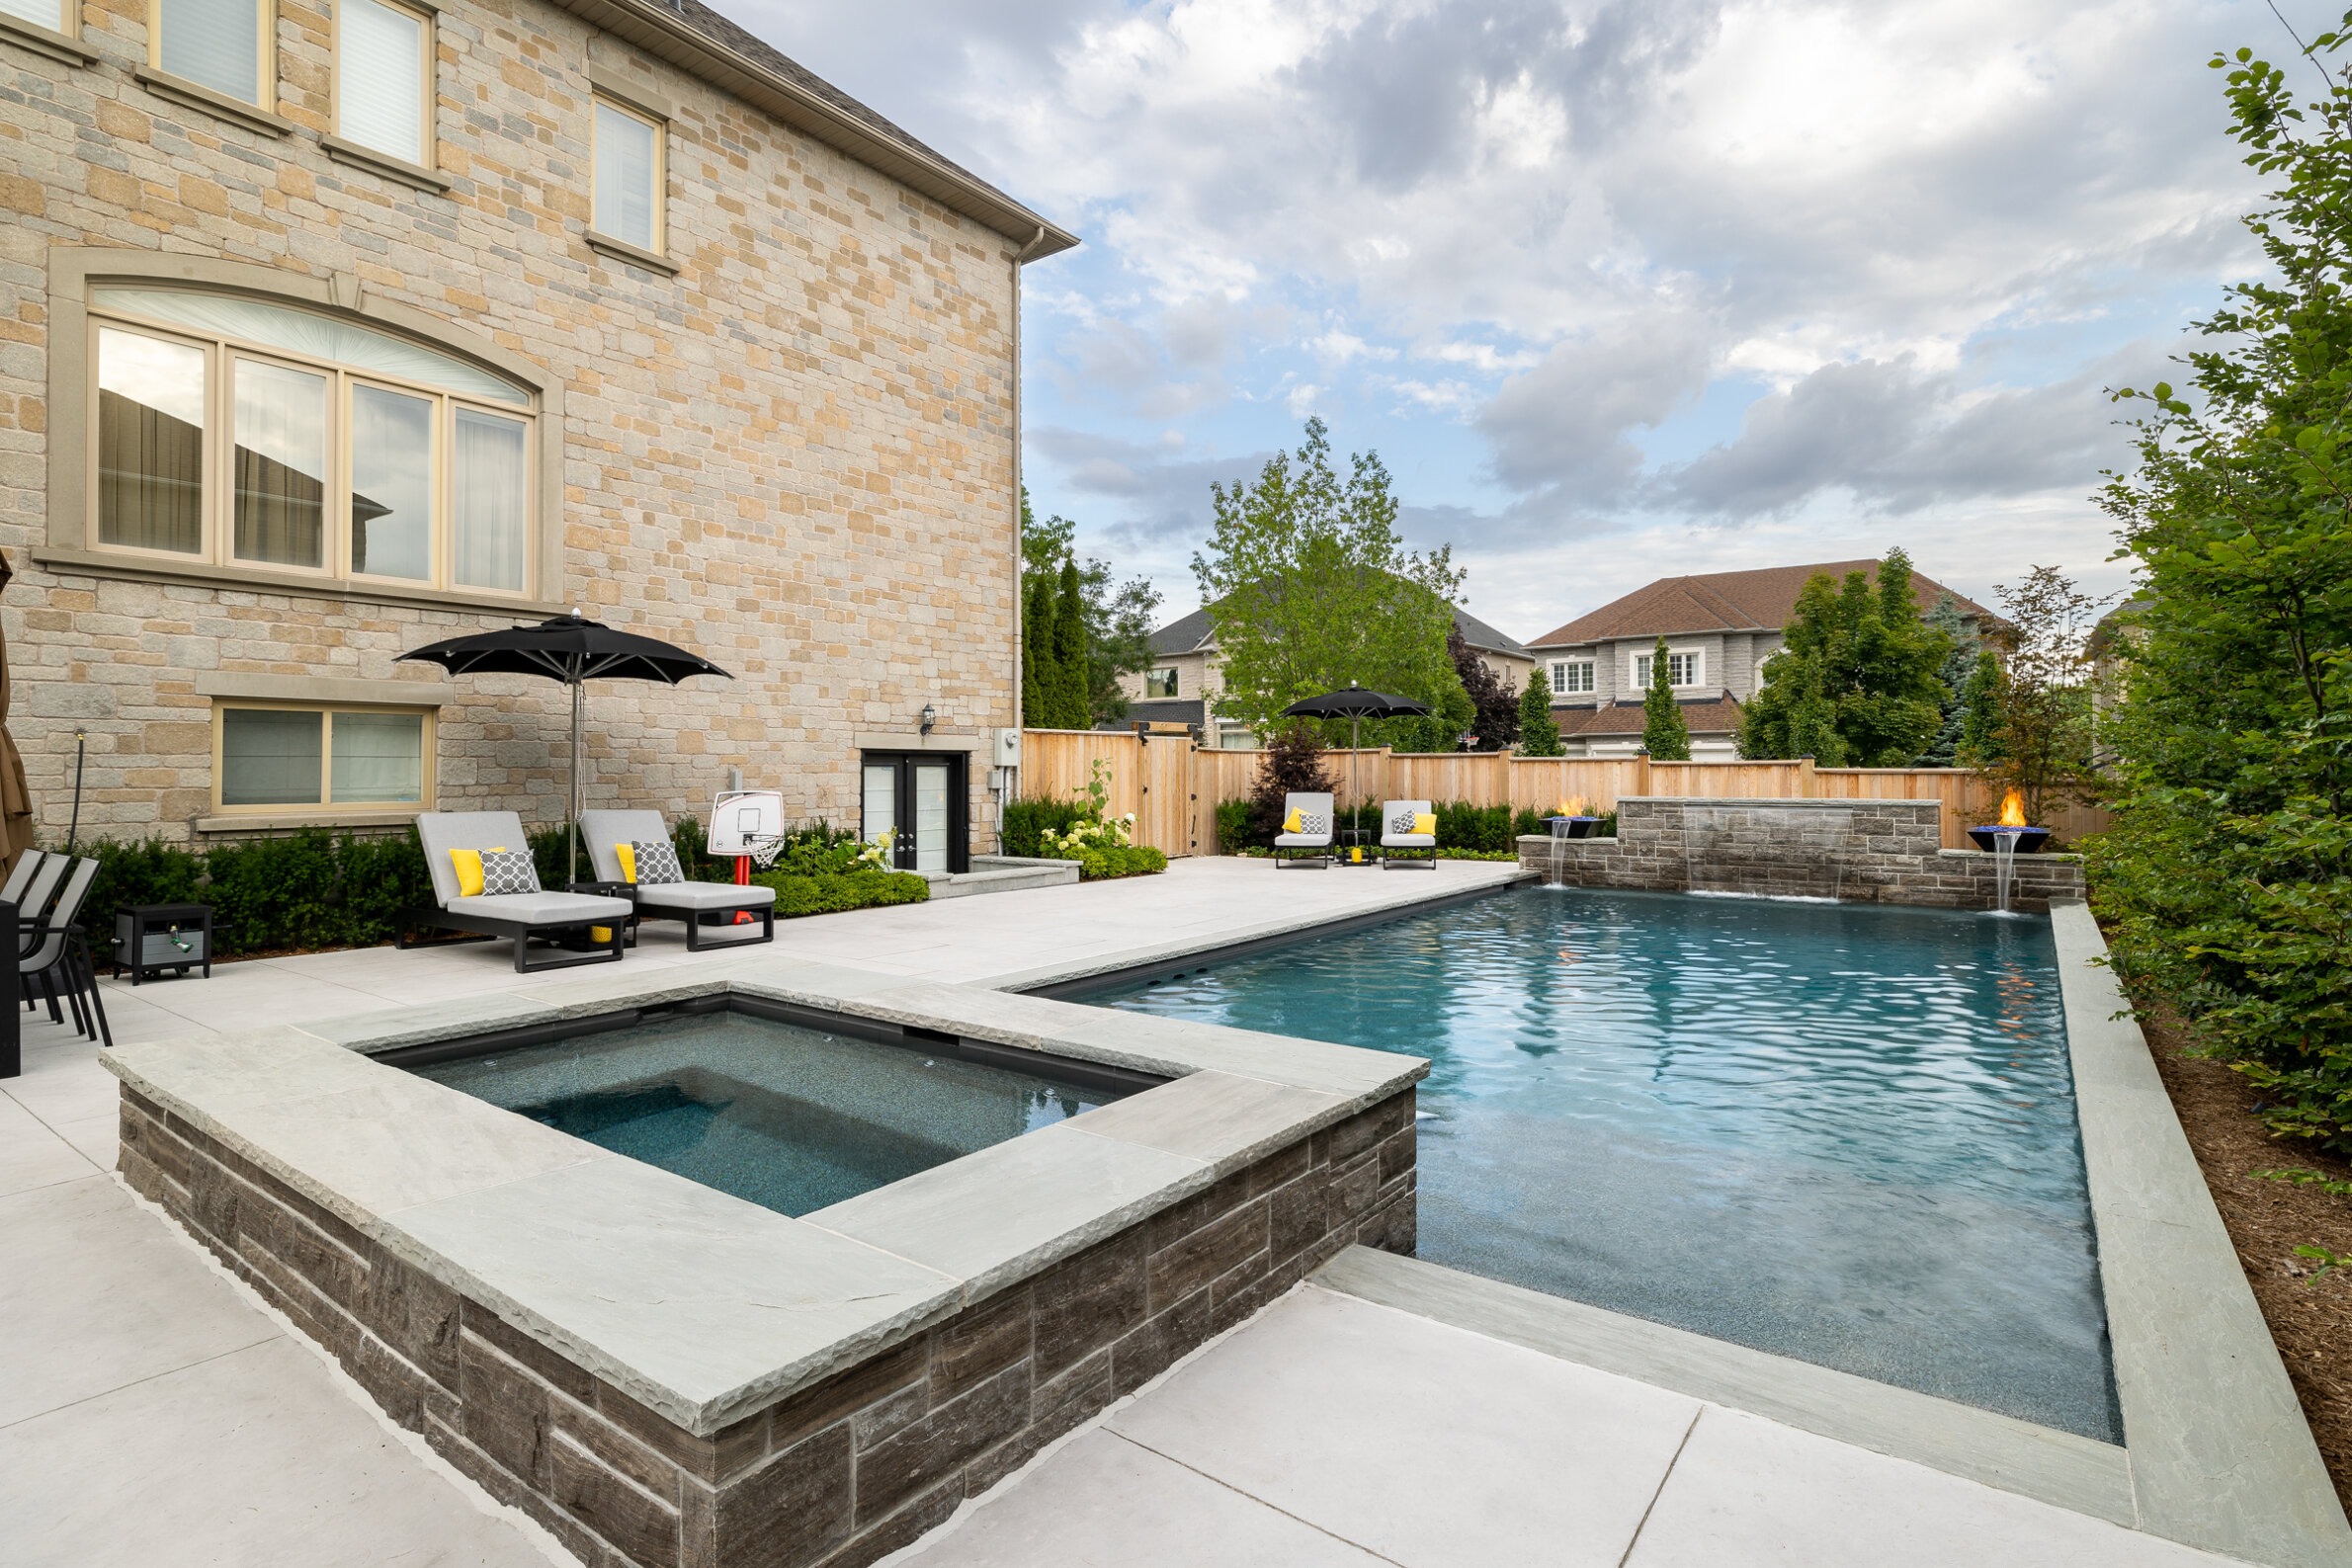 A luxurious backyard with a swimming pool, hot tub, sun loungers, outdoor furniture, a fireplace, and a stone house under a cloudy sky.